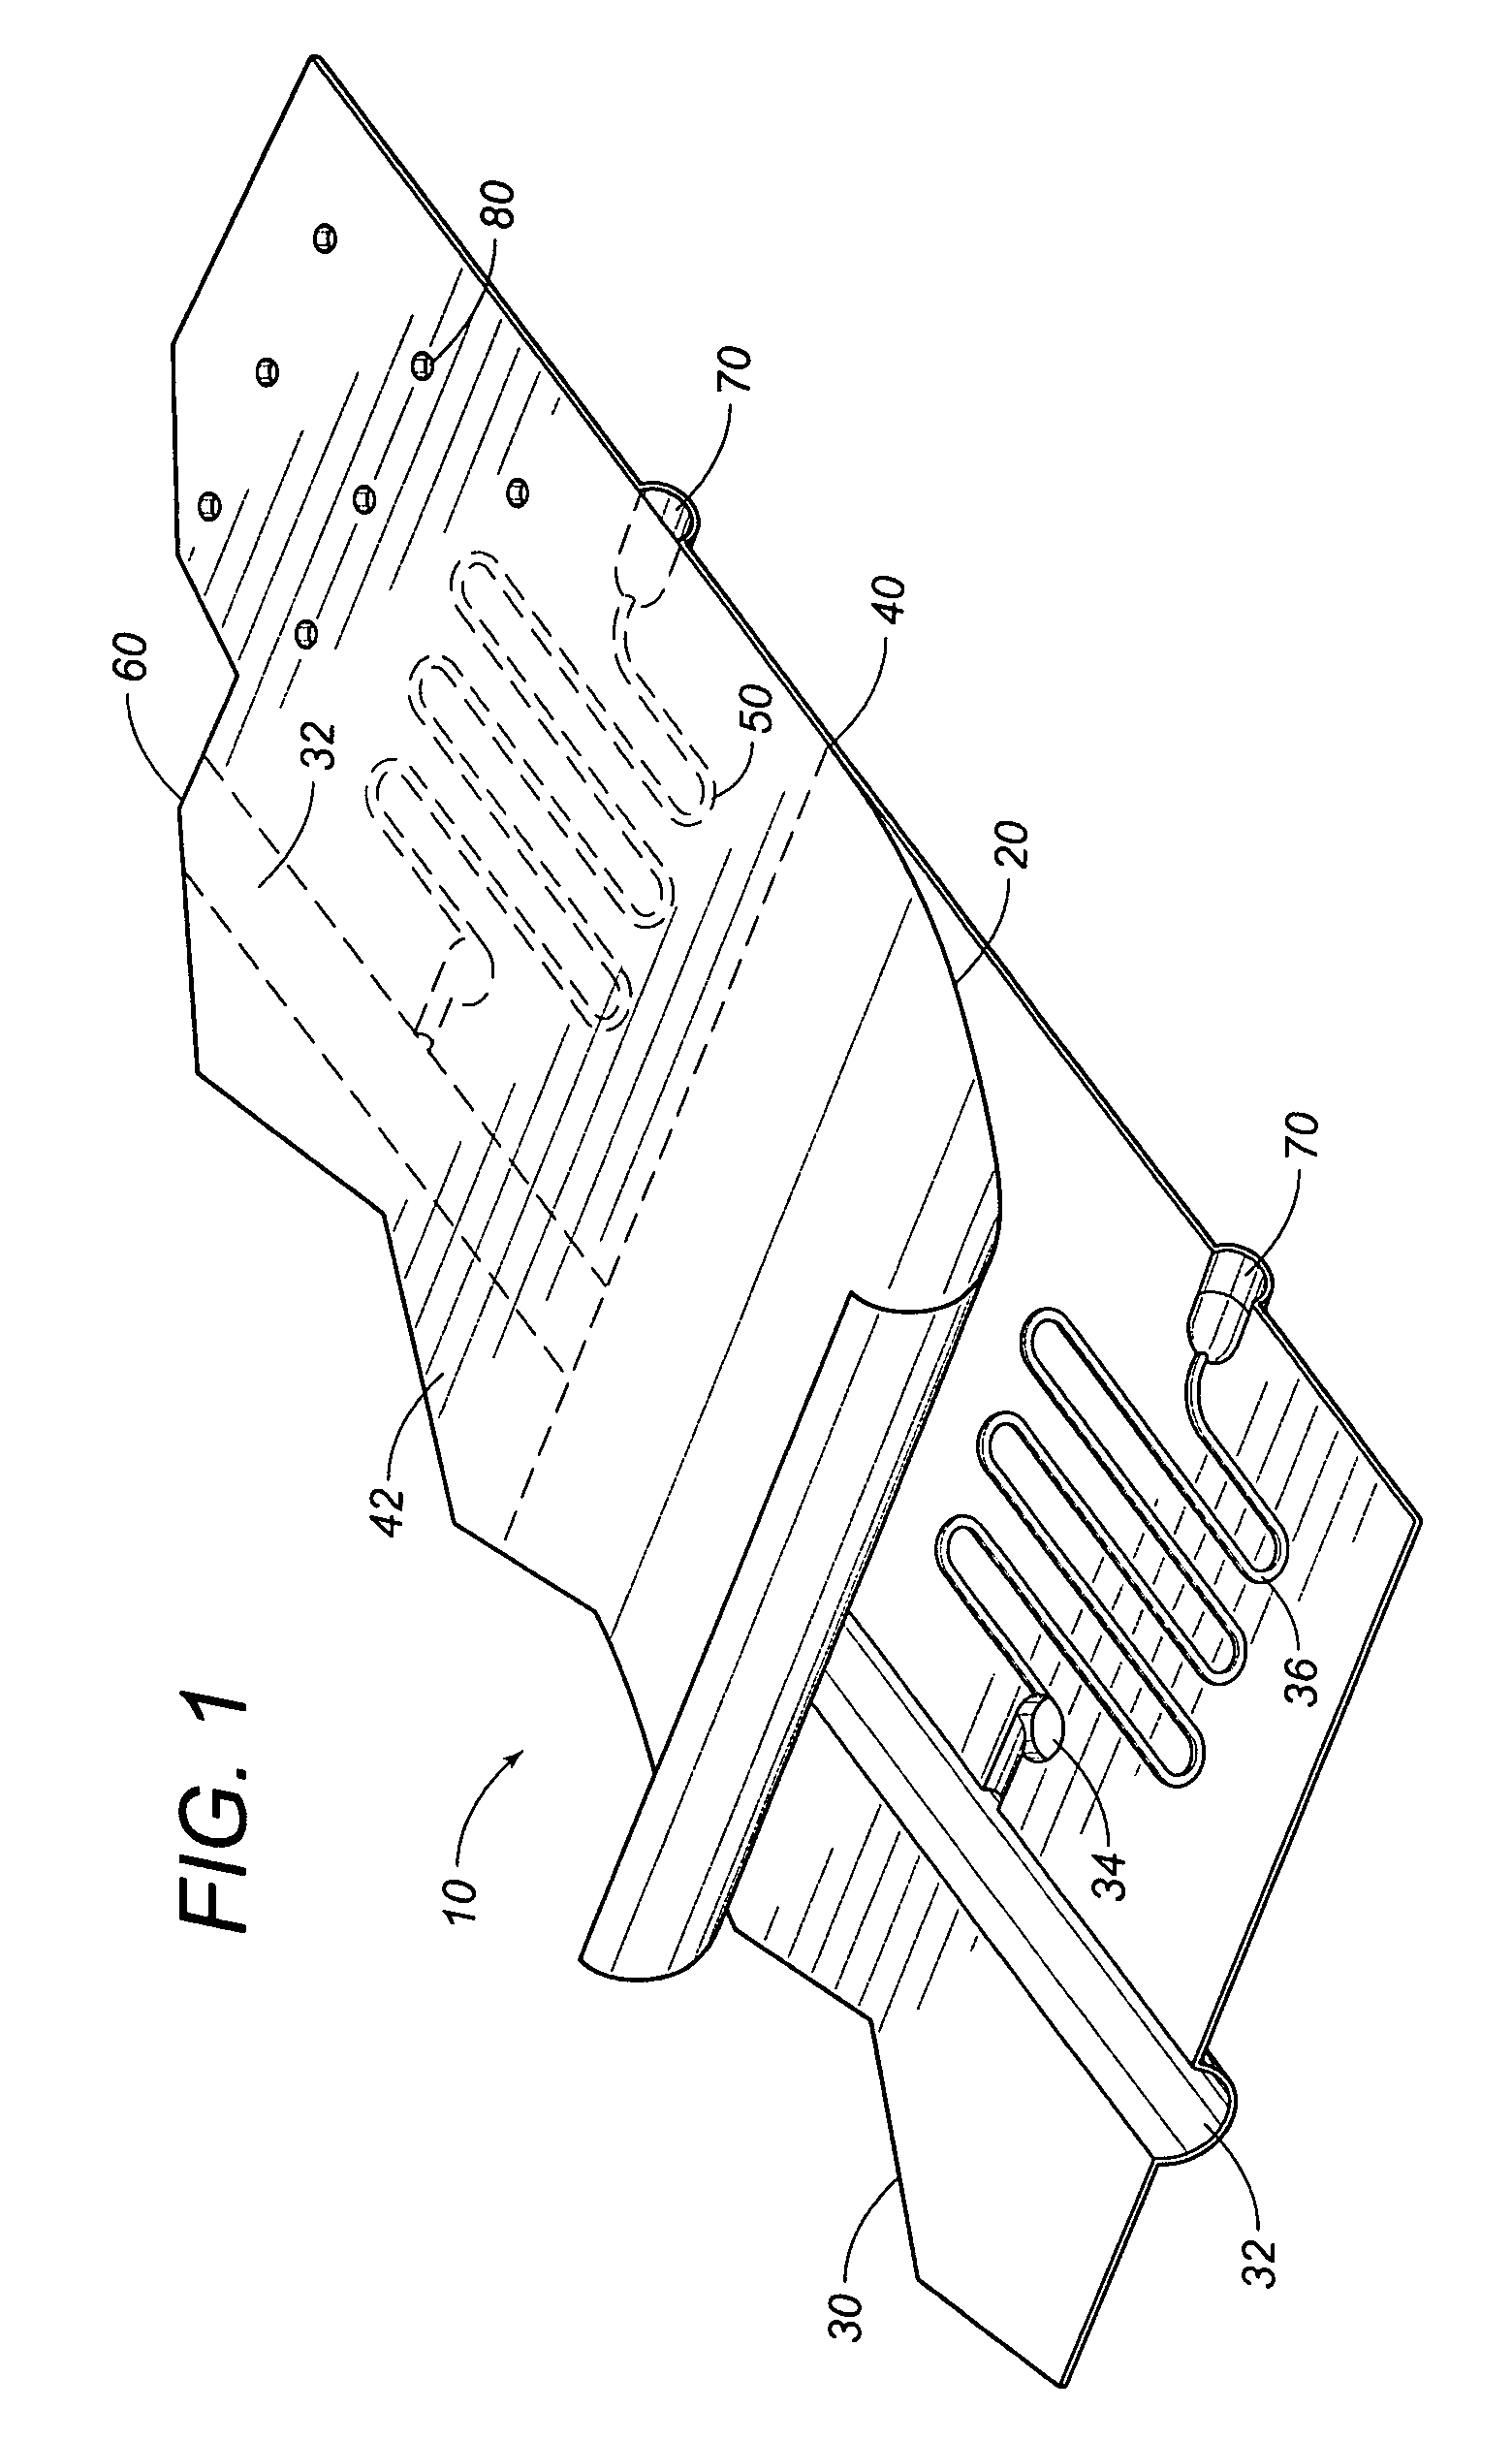 Unitized mat to facilitate growing plants